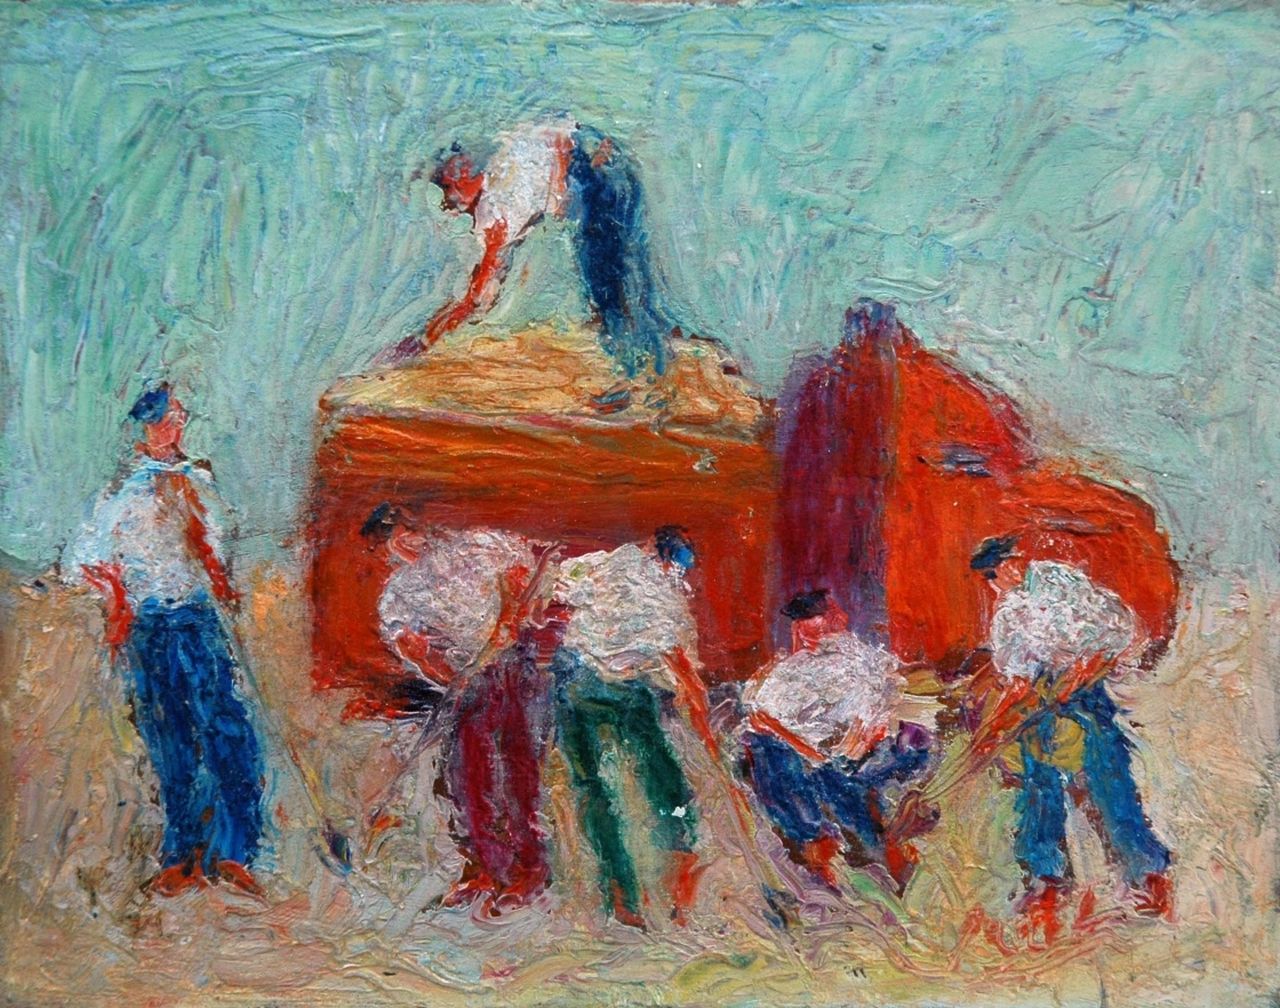 Banet R.  | Rodolphe Banet, Loading the truck, oil on board 13.7 x 17.5 cm, signed l.l. and reverse and dated '24